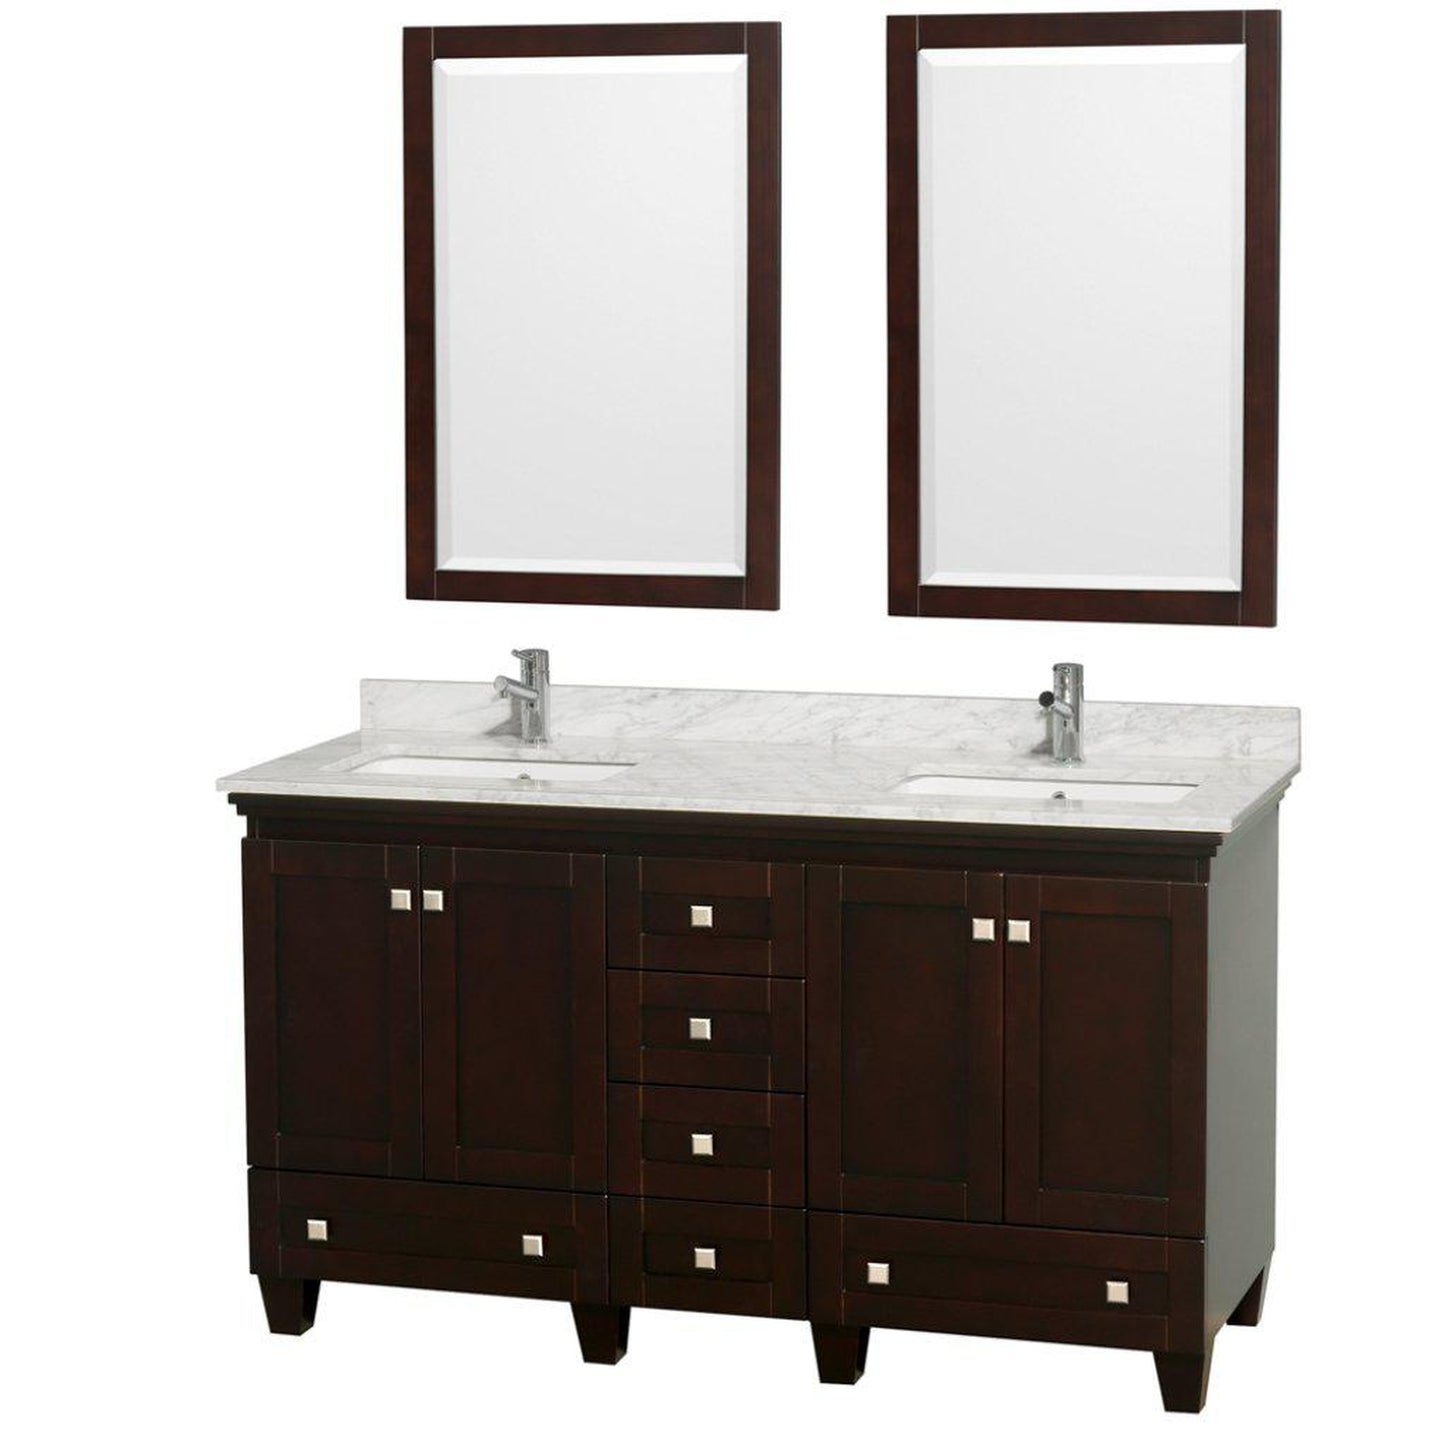 Wyndham Collection Acclaim 60" Double Bathroom Espresso Vanity With White Carrara Marble Countertop And Undermount Square Sinks And 2 Set Of 24" Mirror